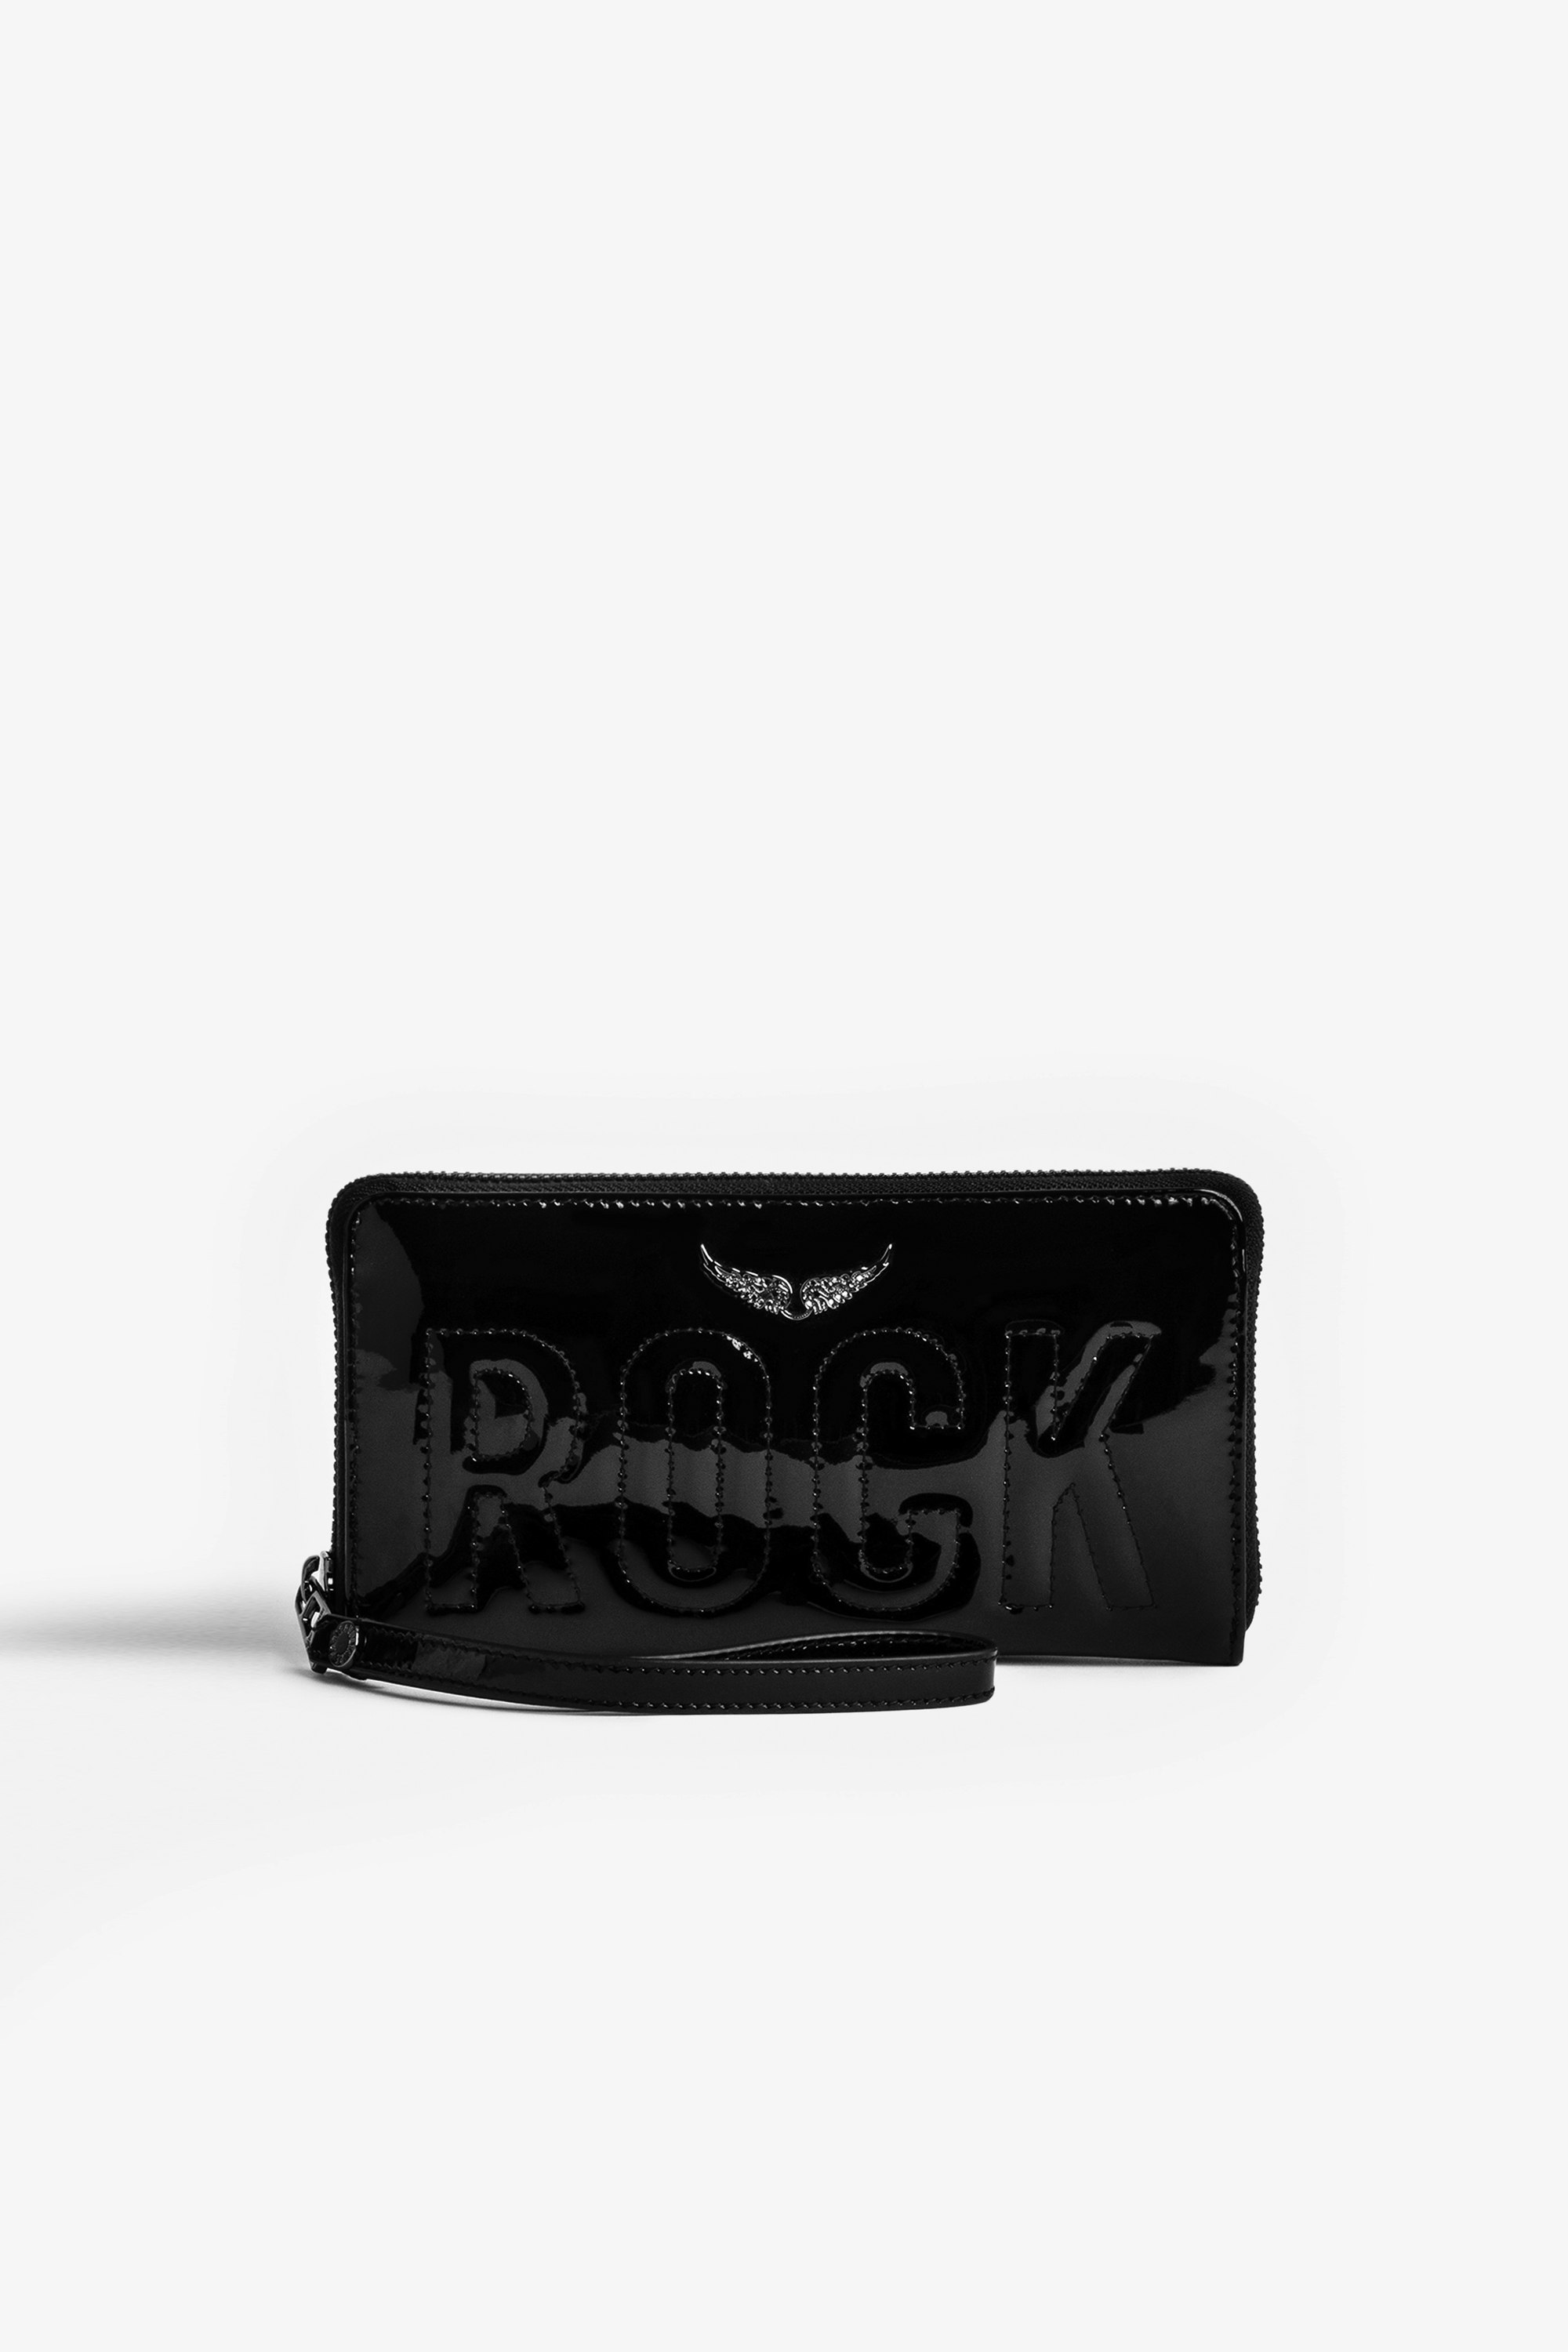 Compagnon 財布 Women’s black patent leather Compagnon wallet with topstitched “Rock” slogan and crystal-embellished wings charm